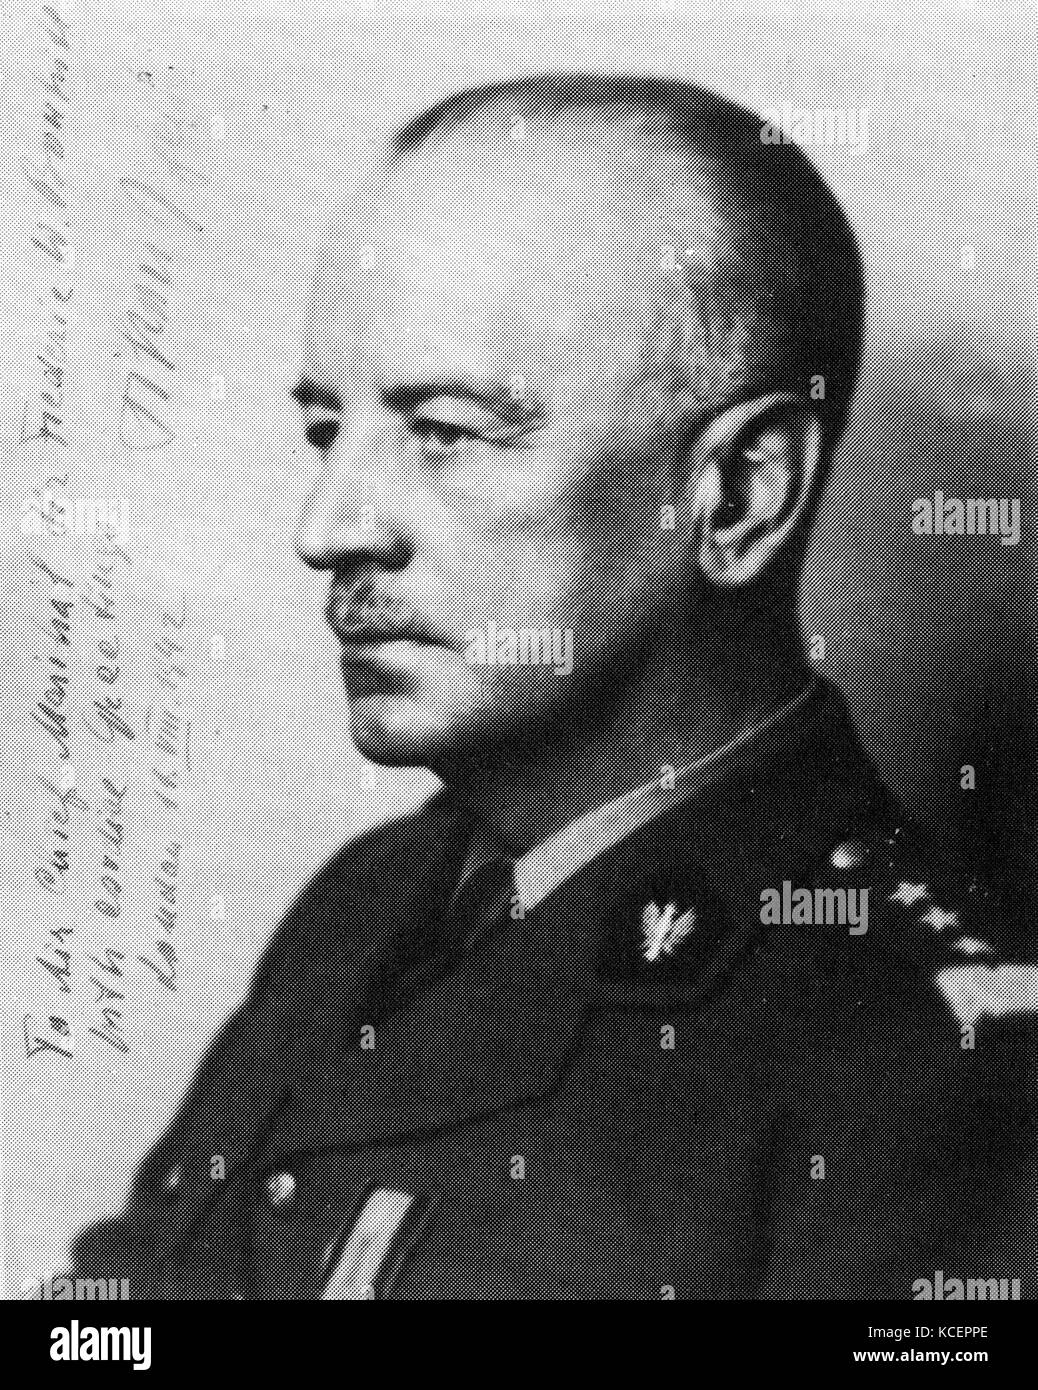 Photograph of Wladyslaw Sikorski (1881-1943) a Polish military and political leader. Dated 20th Century Stock Photo